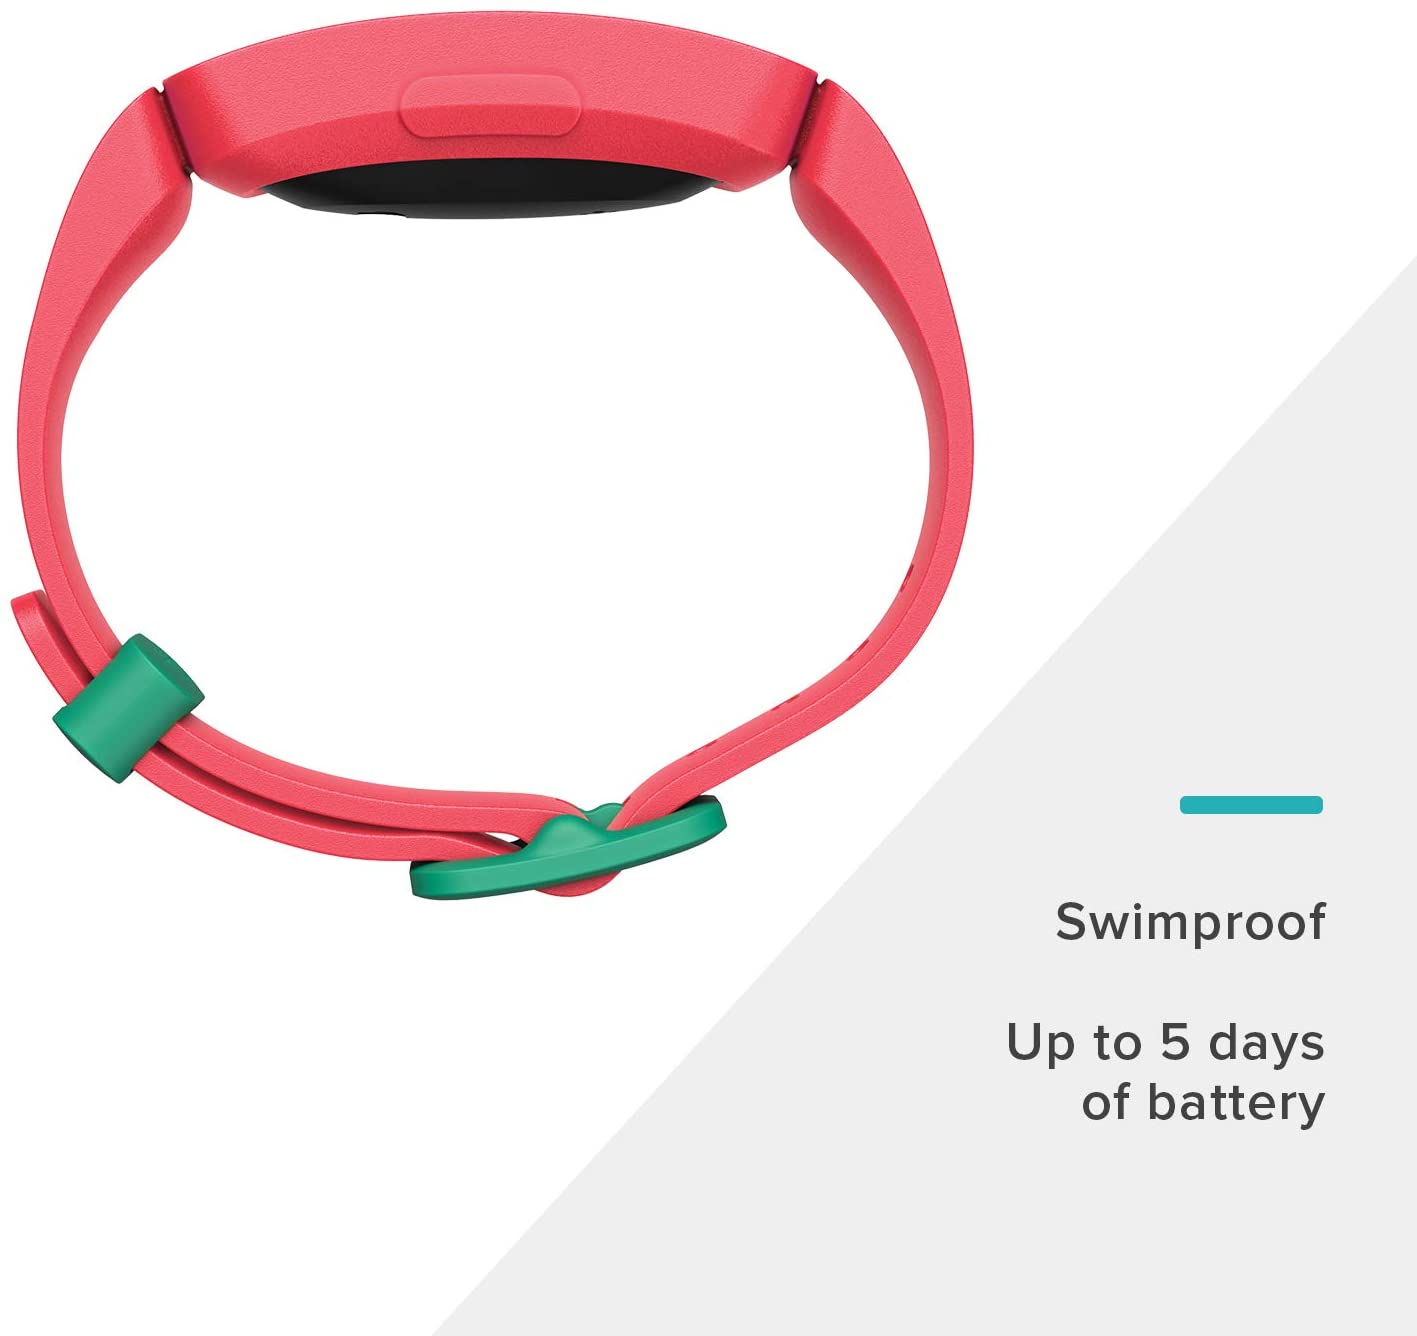 Fitbit Ace 2 Activity Tracker for Kids, Watermelon + Teal - image 3 of 10